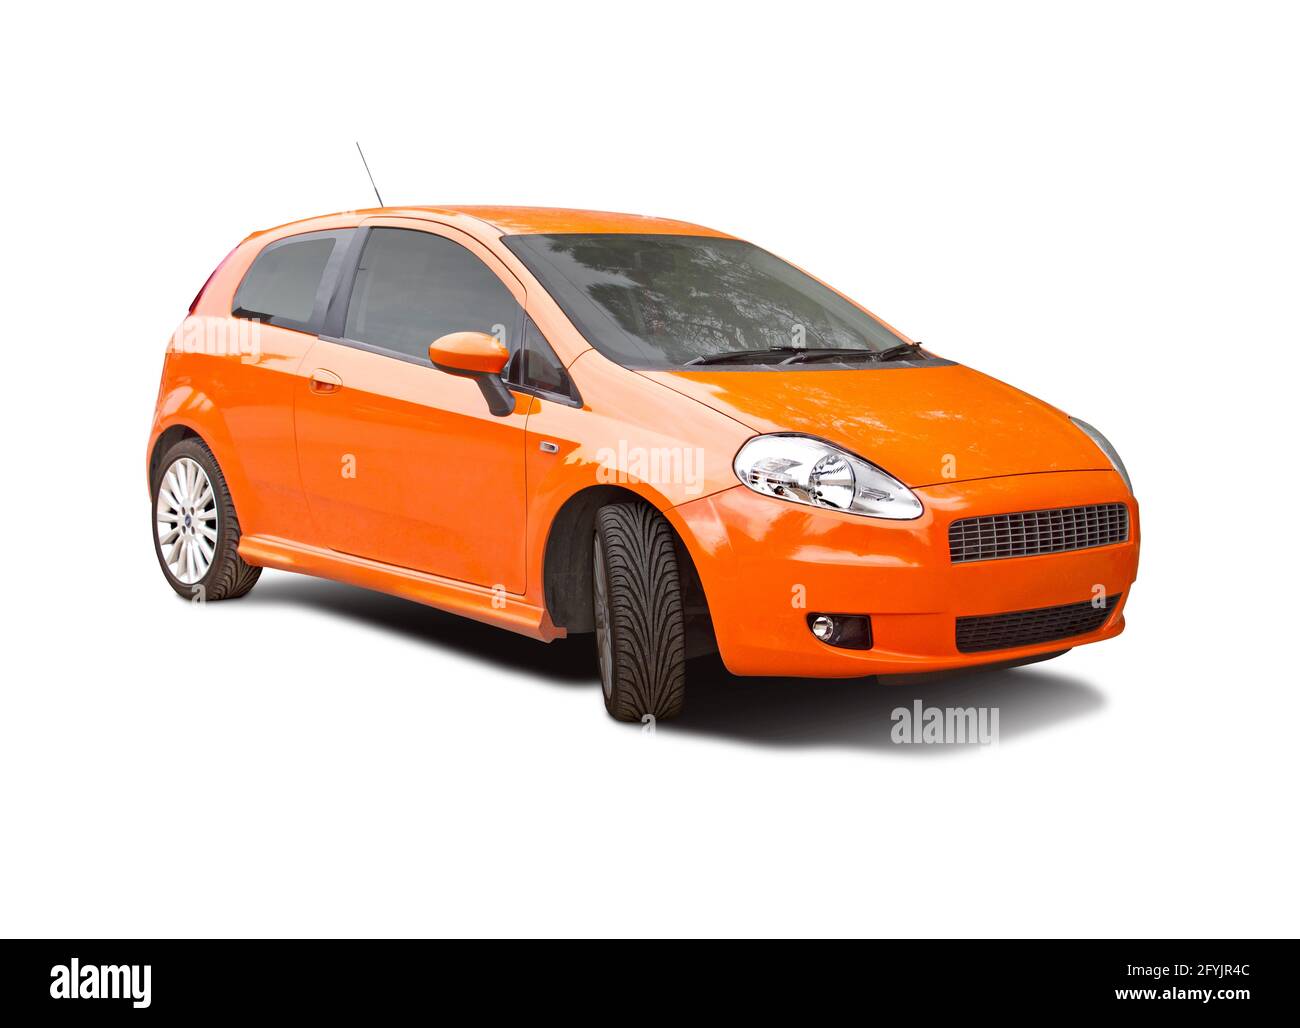 Orange Fiat High Resolution Stock Photography and Images - Alamy